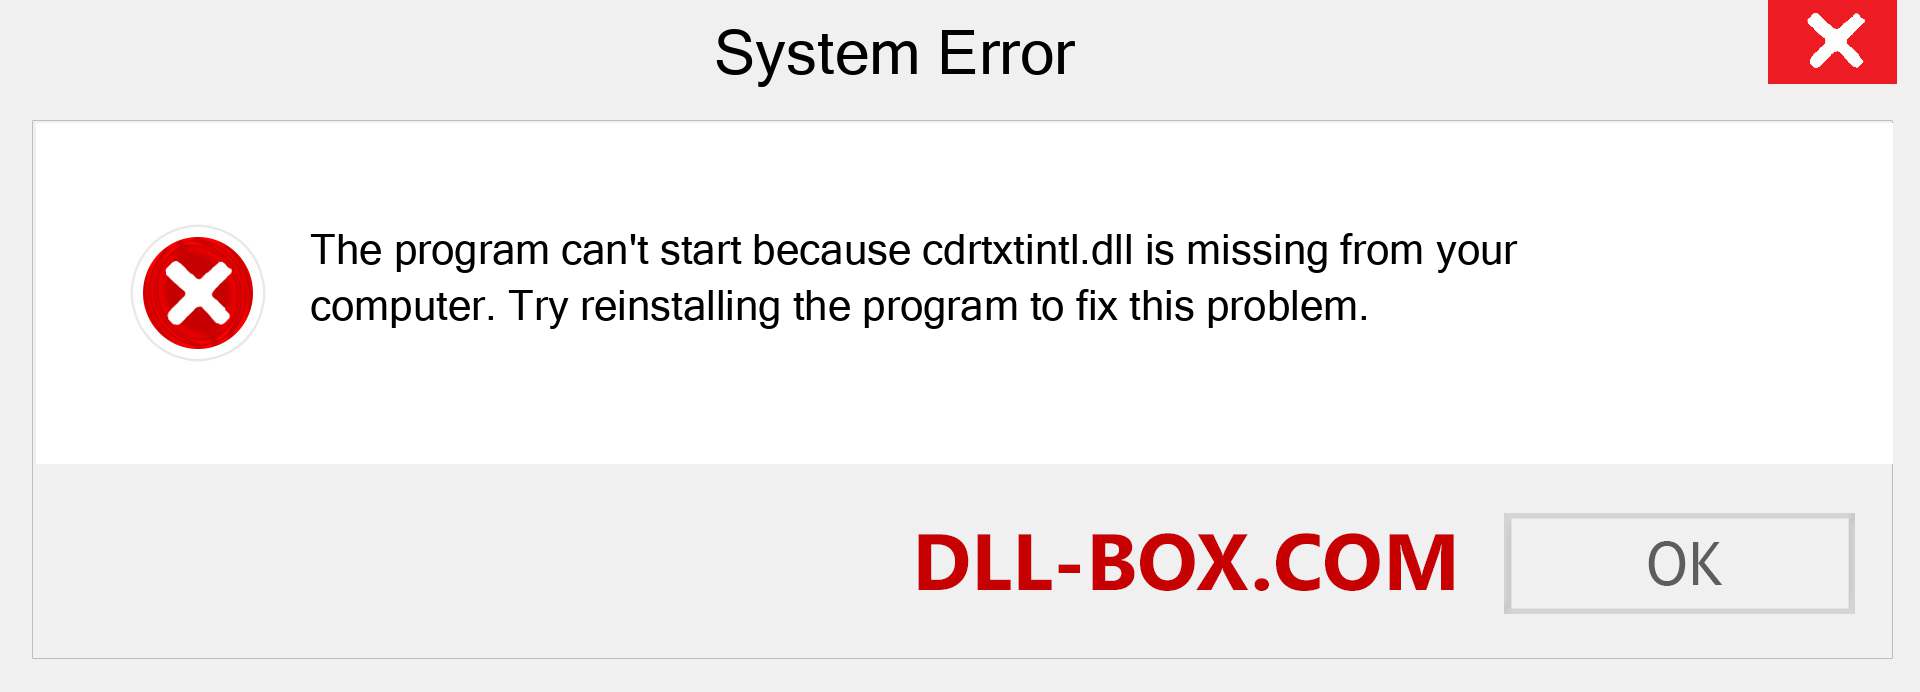  cdrtxtintl.dll file is missing?. Download for Windows 7, 8, 10 - Fix  cdrtxtintl dll Missing Error on Windows, photos, images